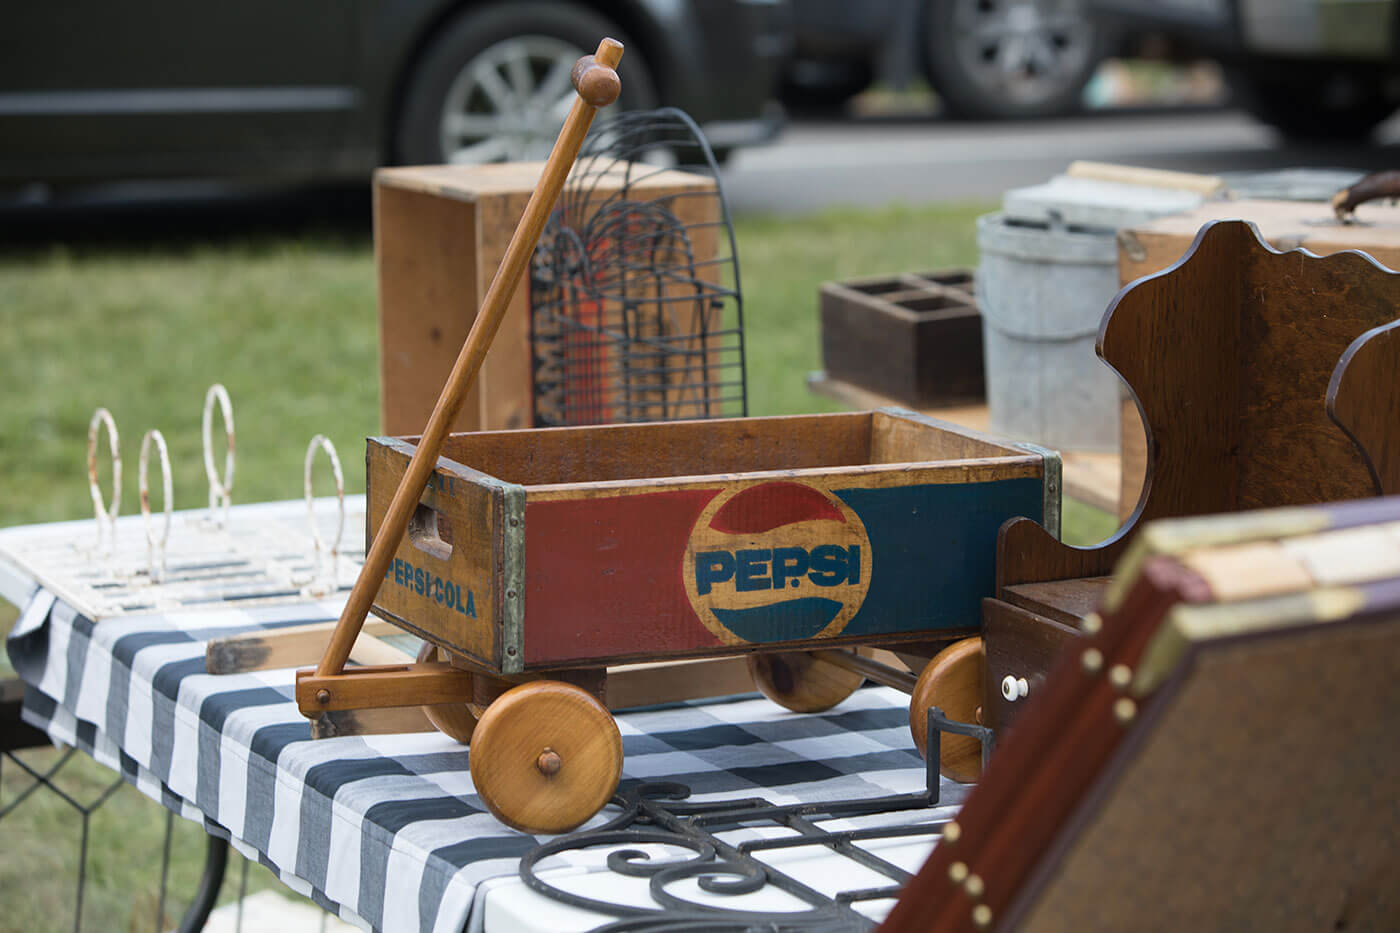 An old wooden wagon with the Pepsi logo painted on it sits on a checkered tablecloth.